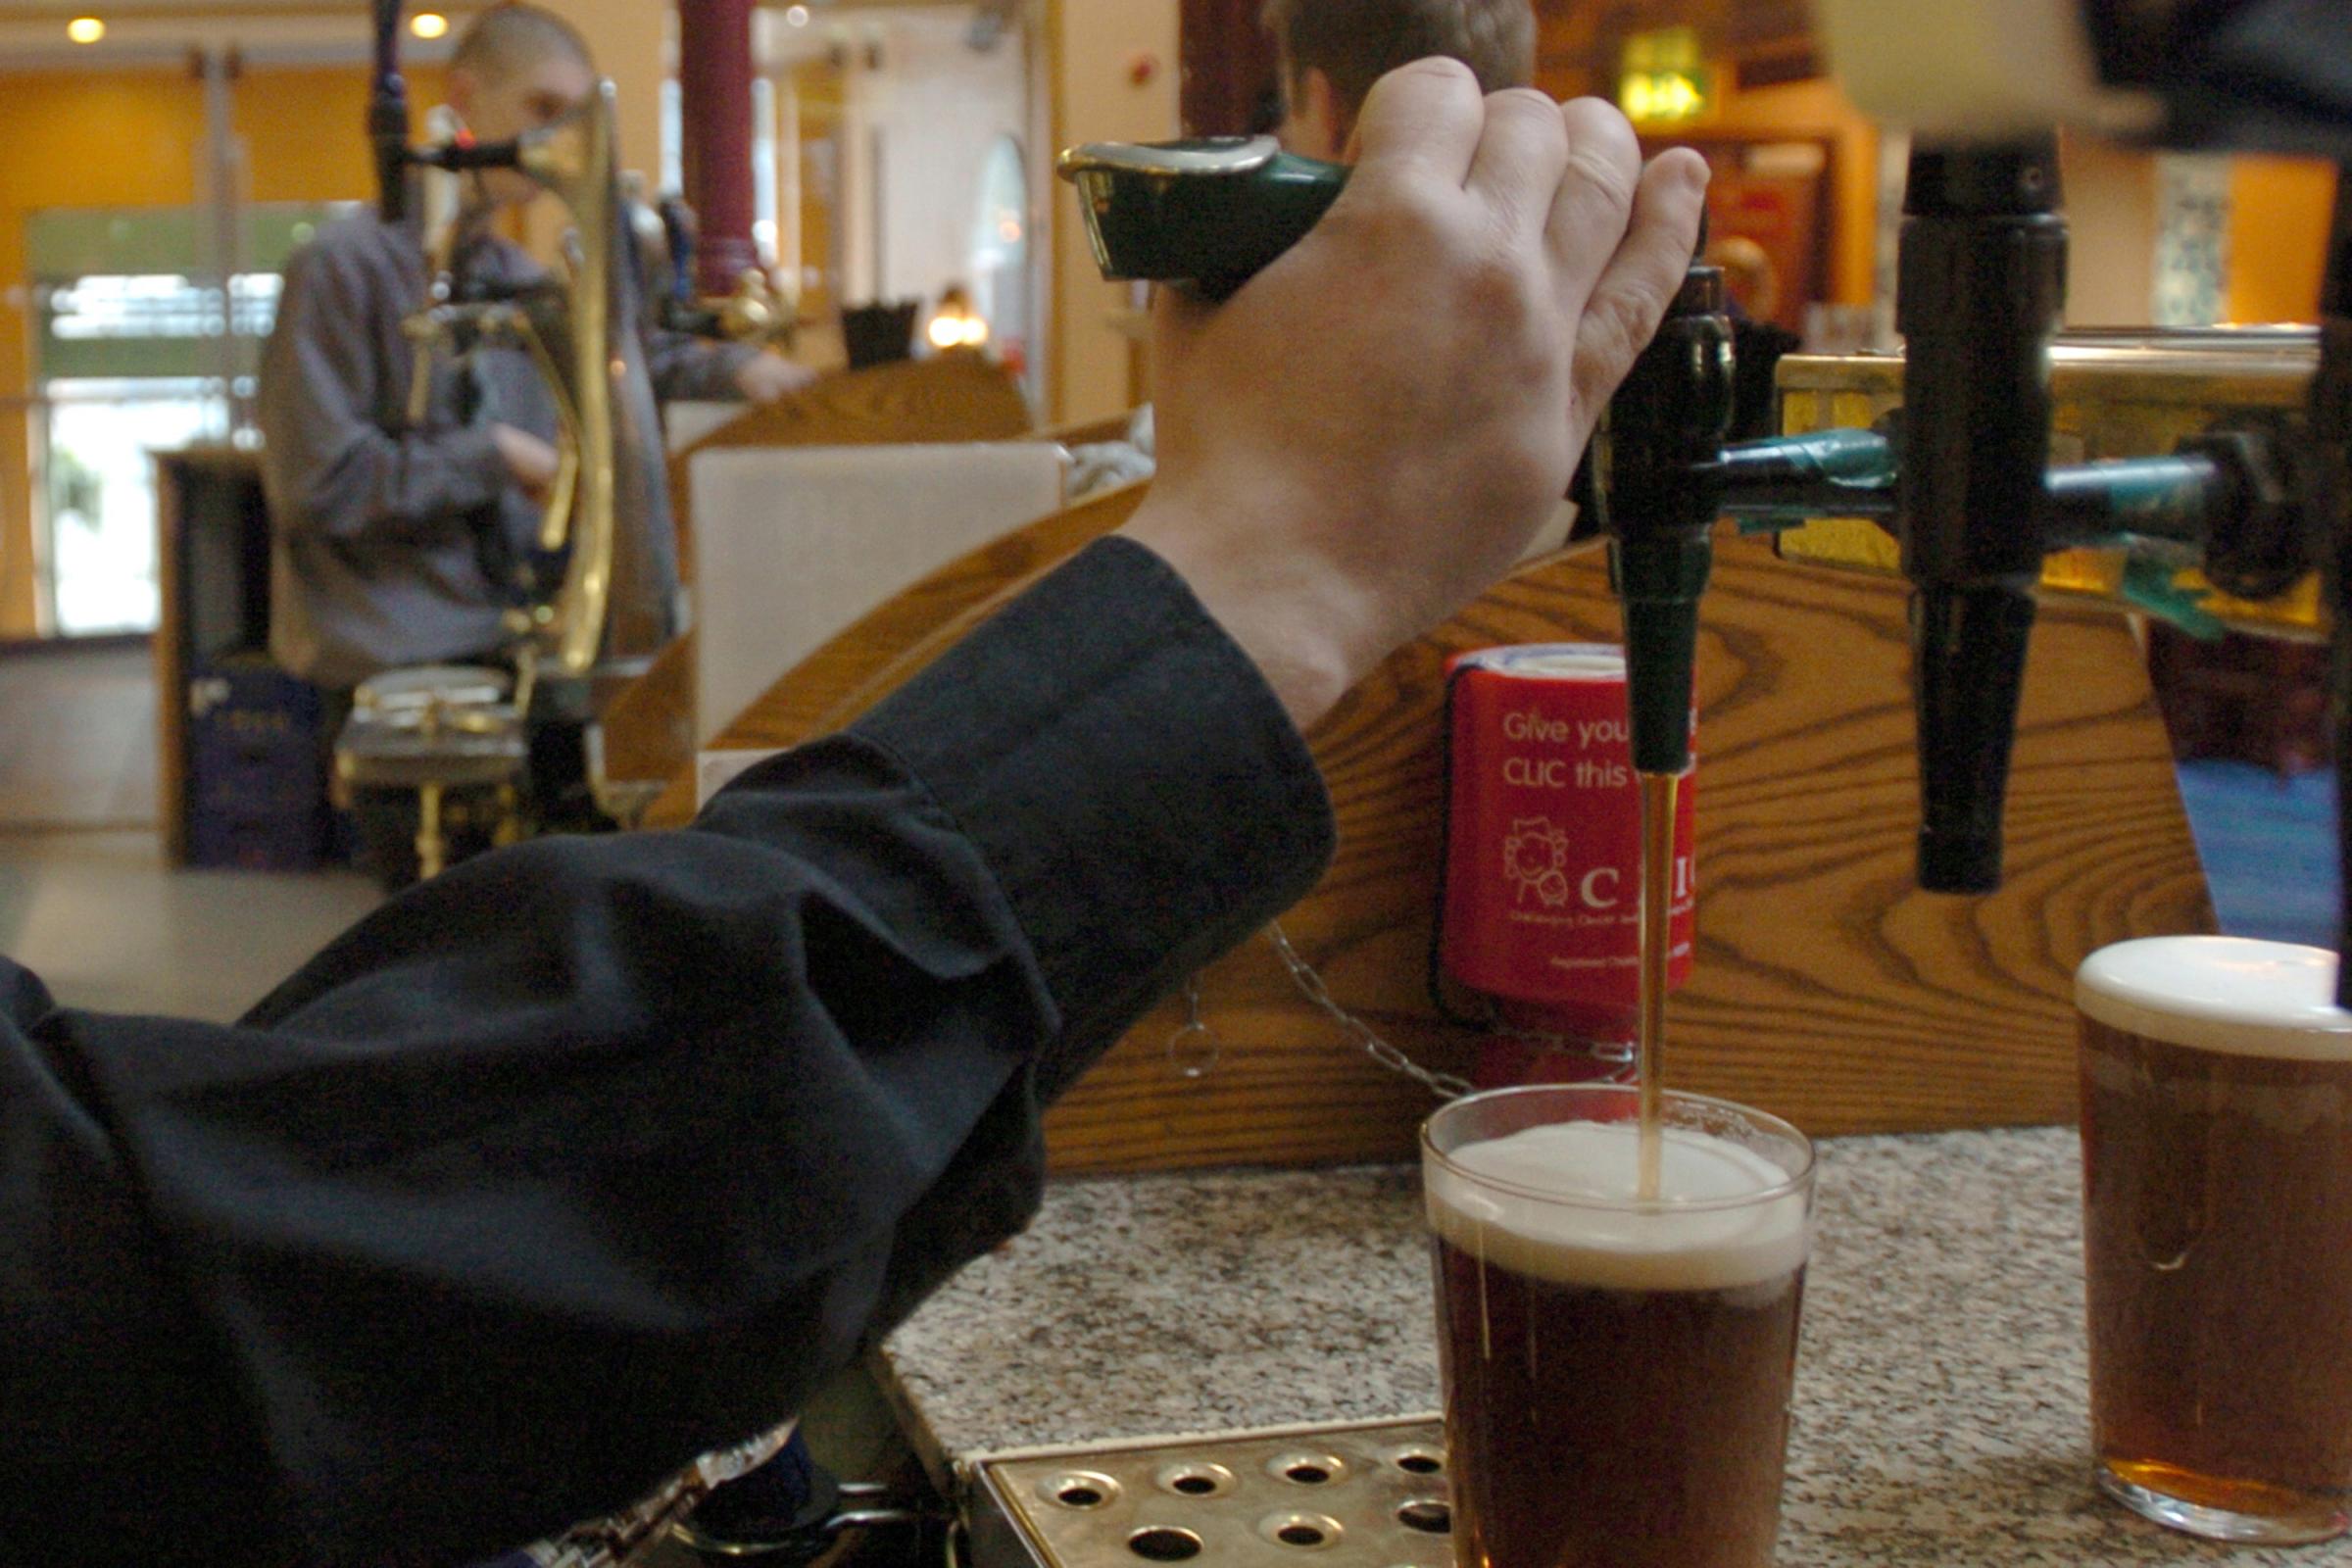 Communities to share experiences on saving their local pubs and shops